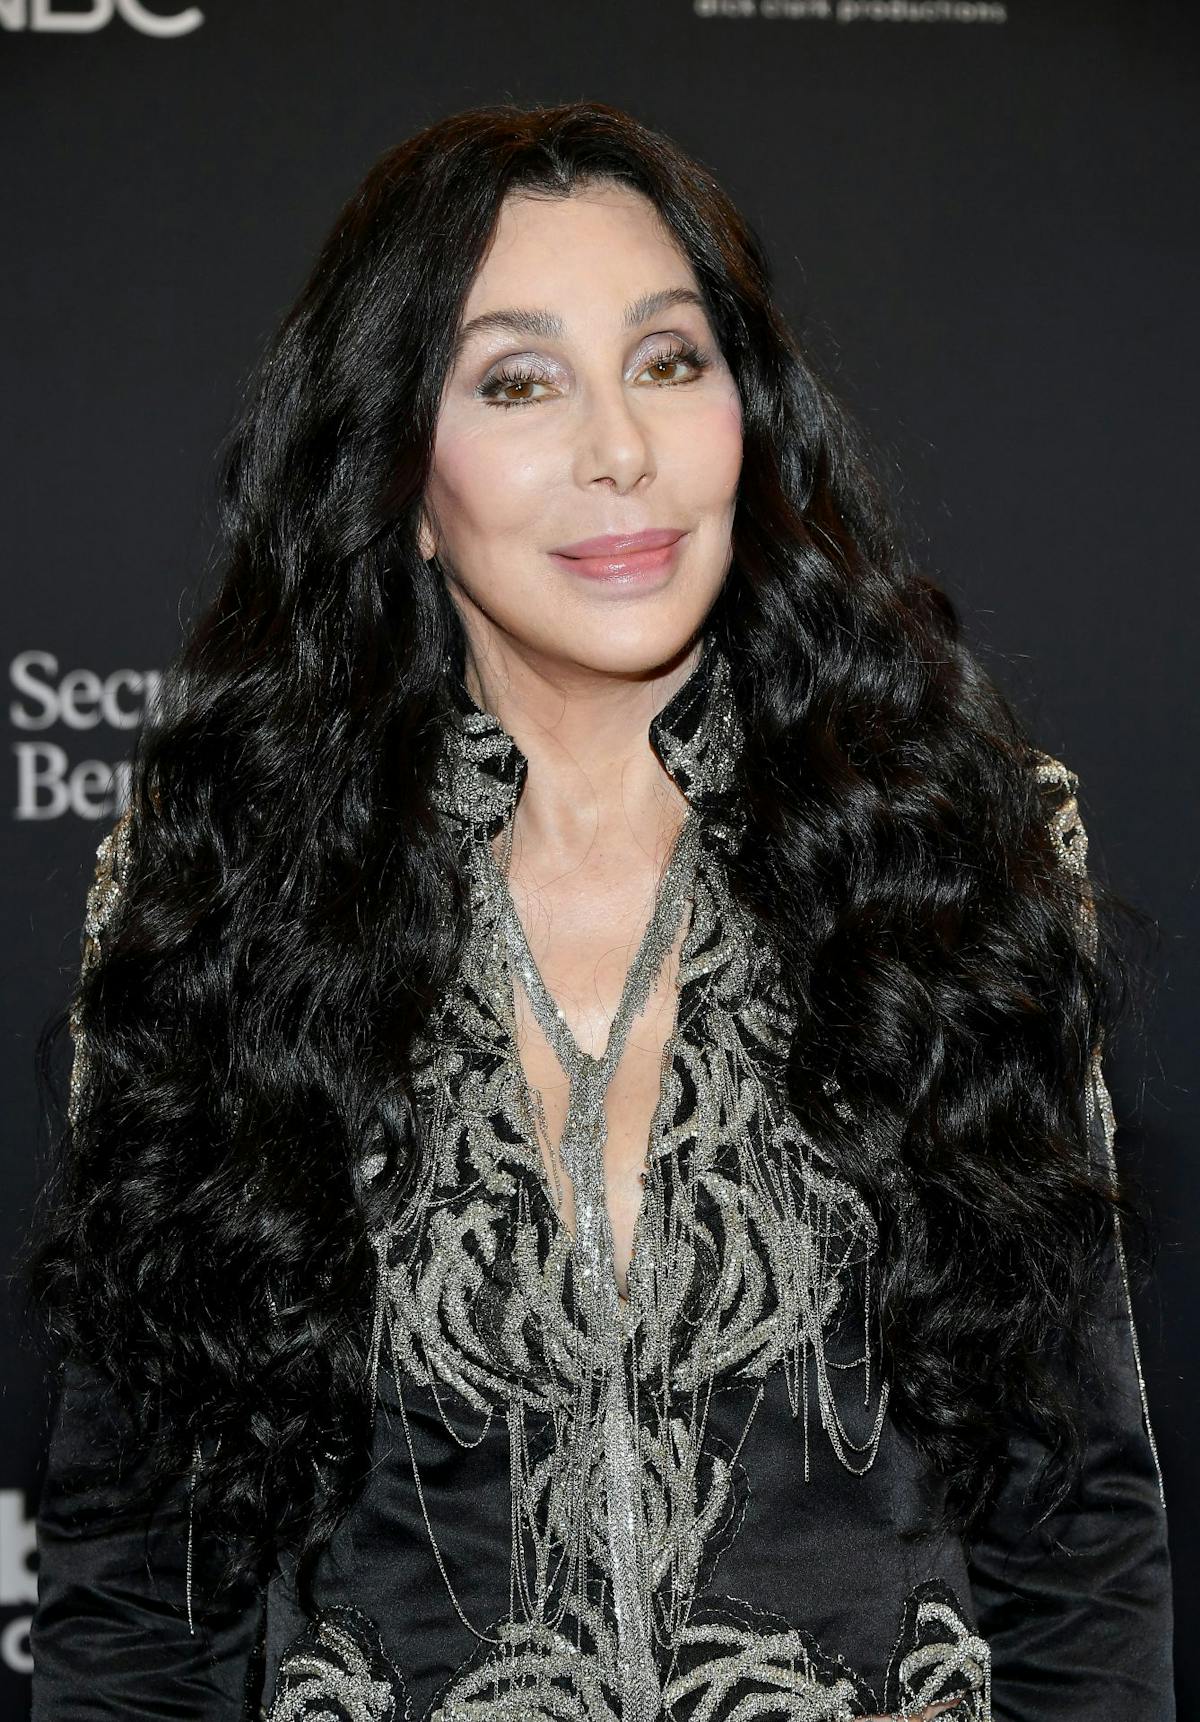 Cher has announced a biopic here are all the details so far